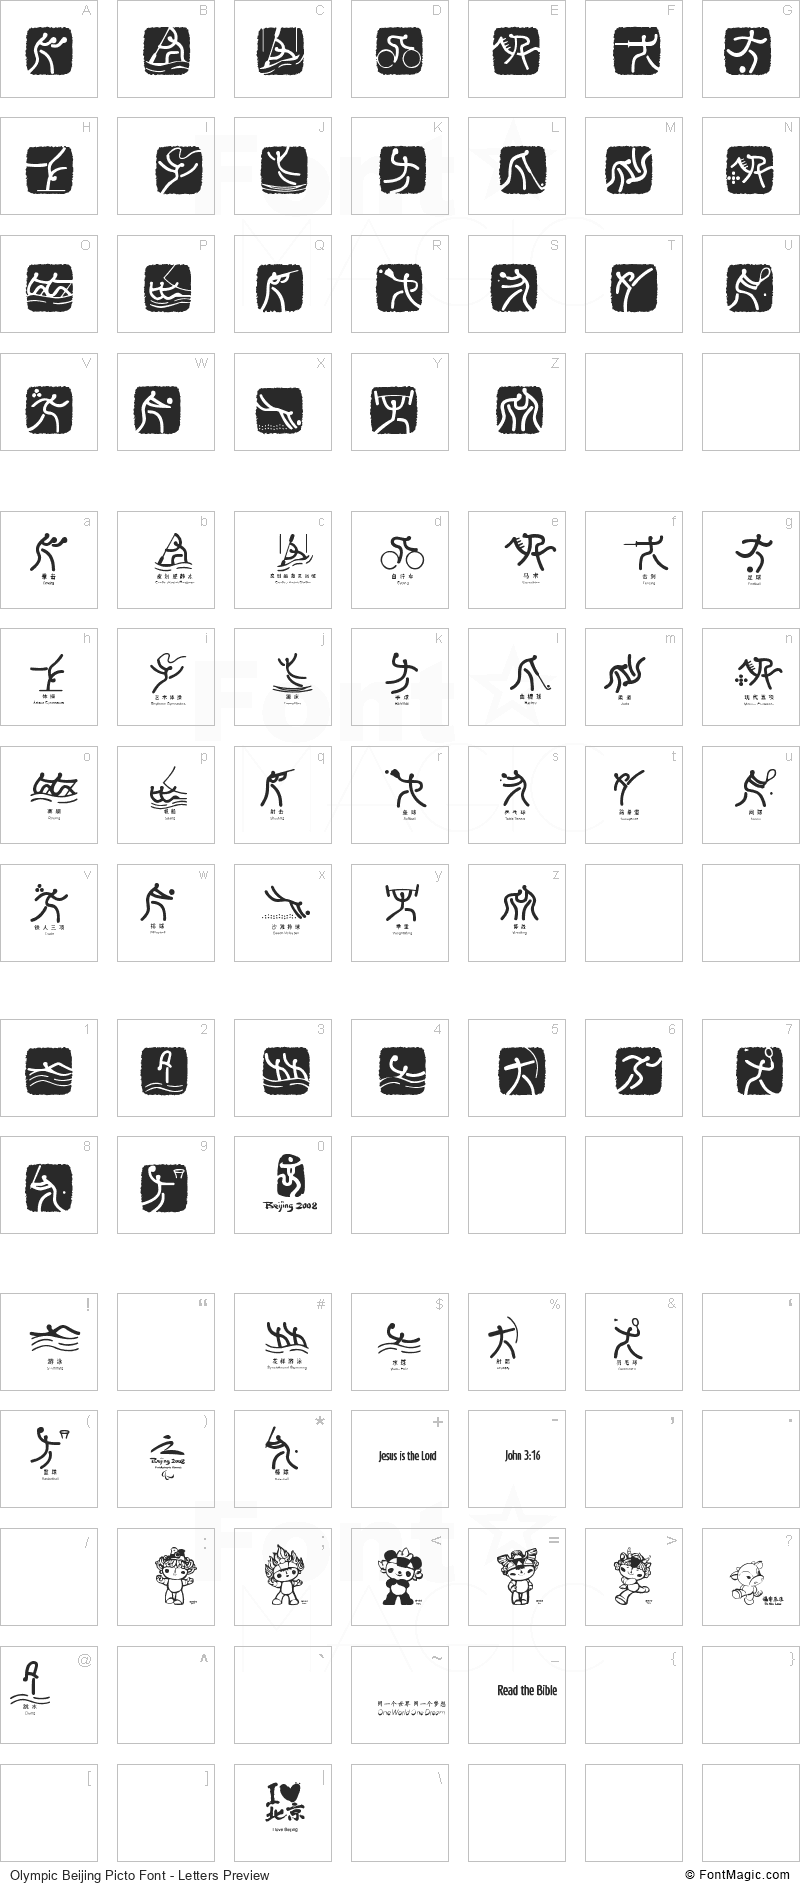 Olympic Beijing Picto Font - All Latters Preview Chart